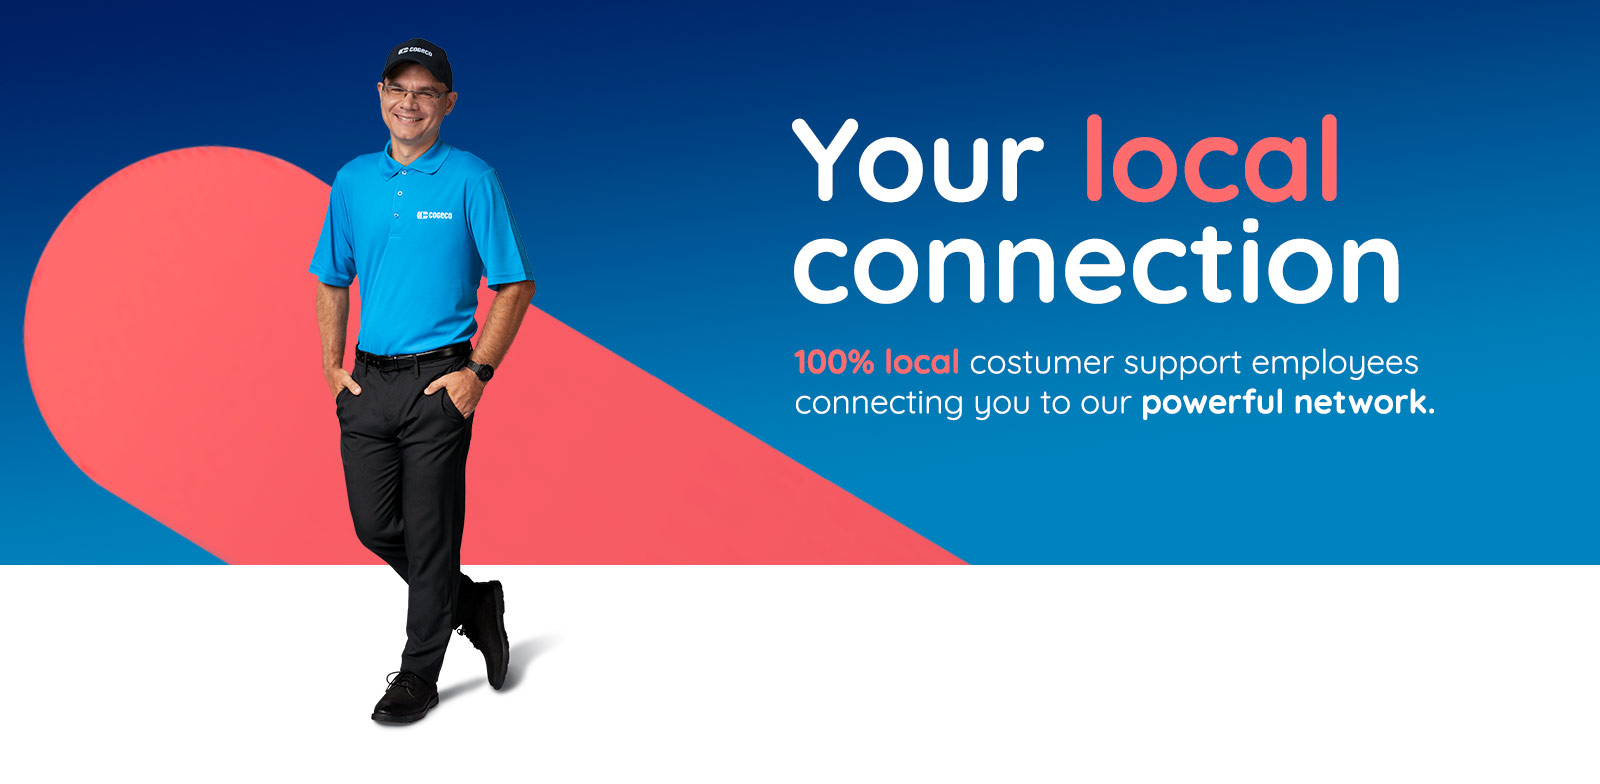 Your local connection. 100% local customer support employees connecting you to our powerful network.